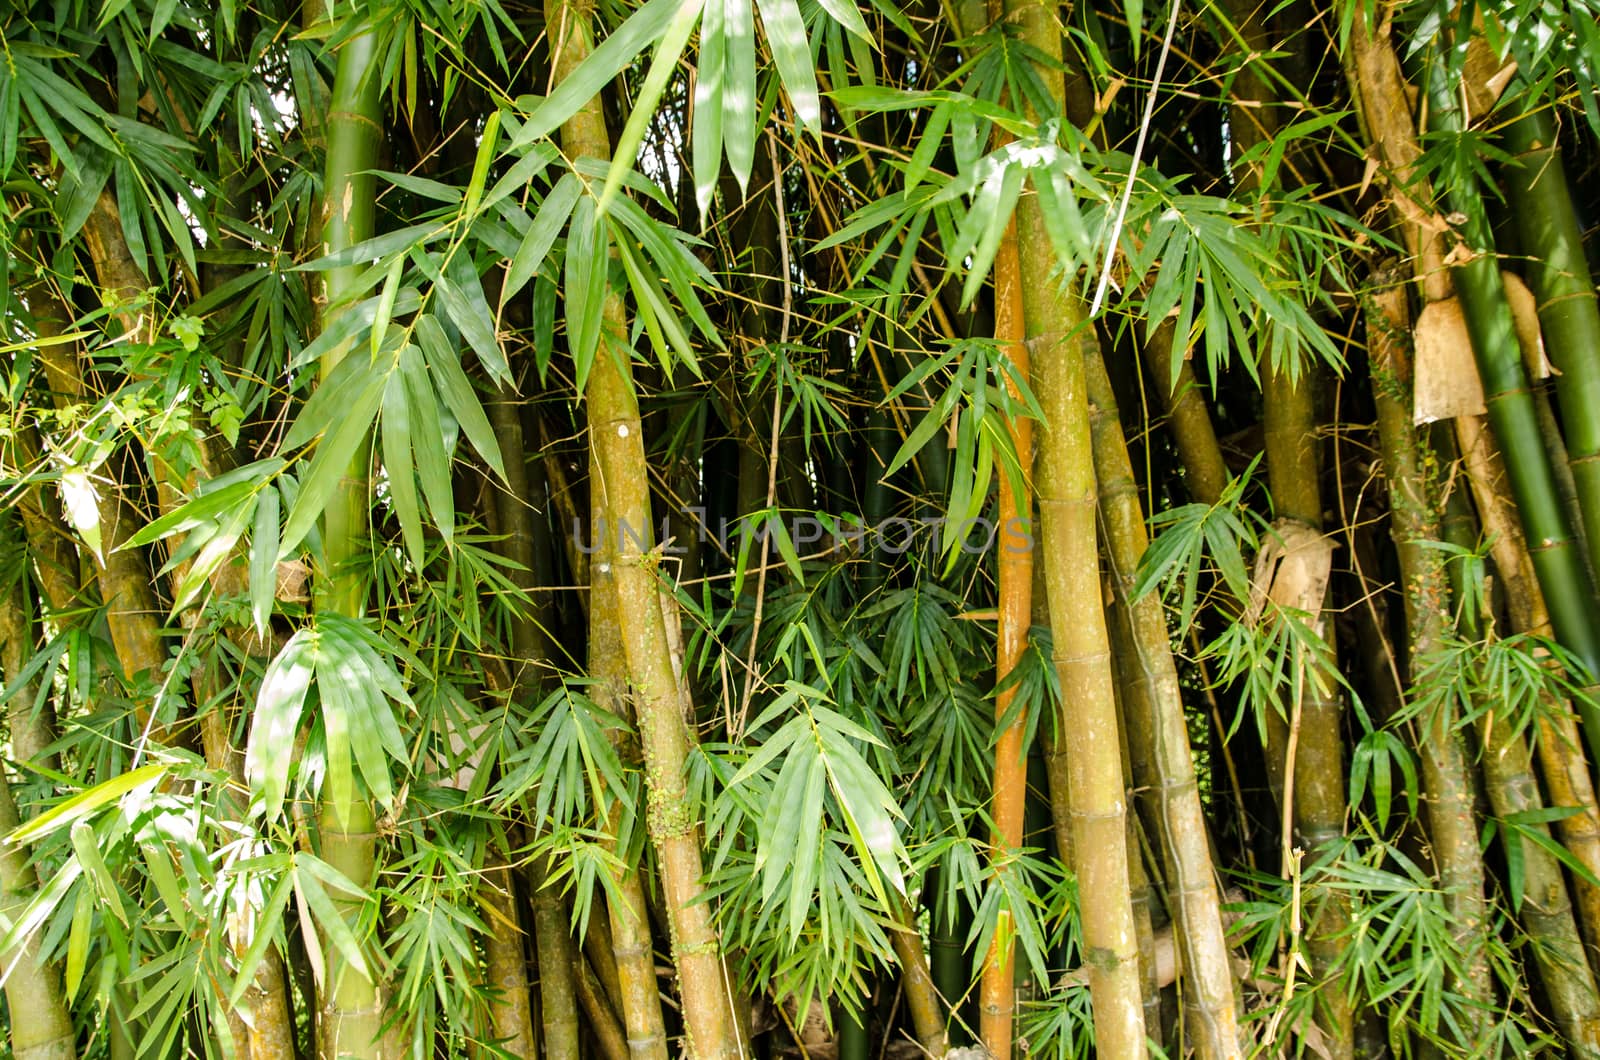 Background image of bamboo stems and leaves in dappled sunshine.  